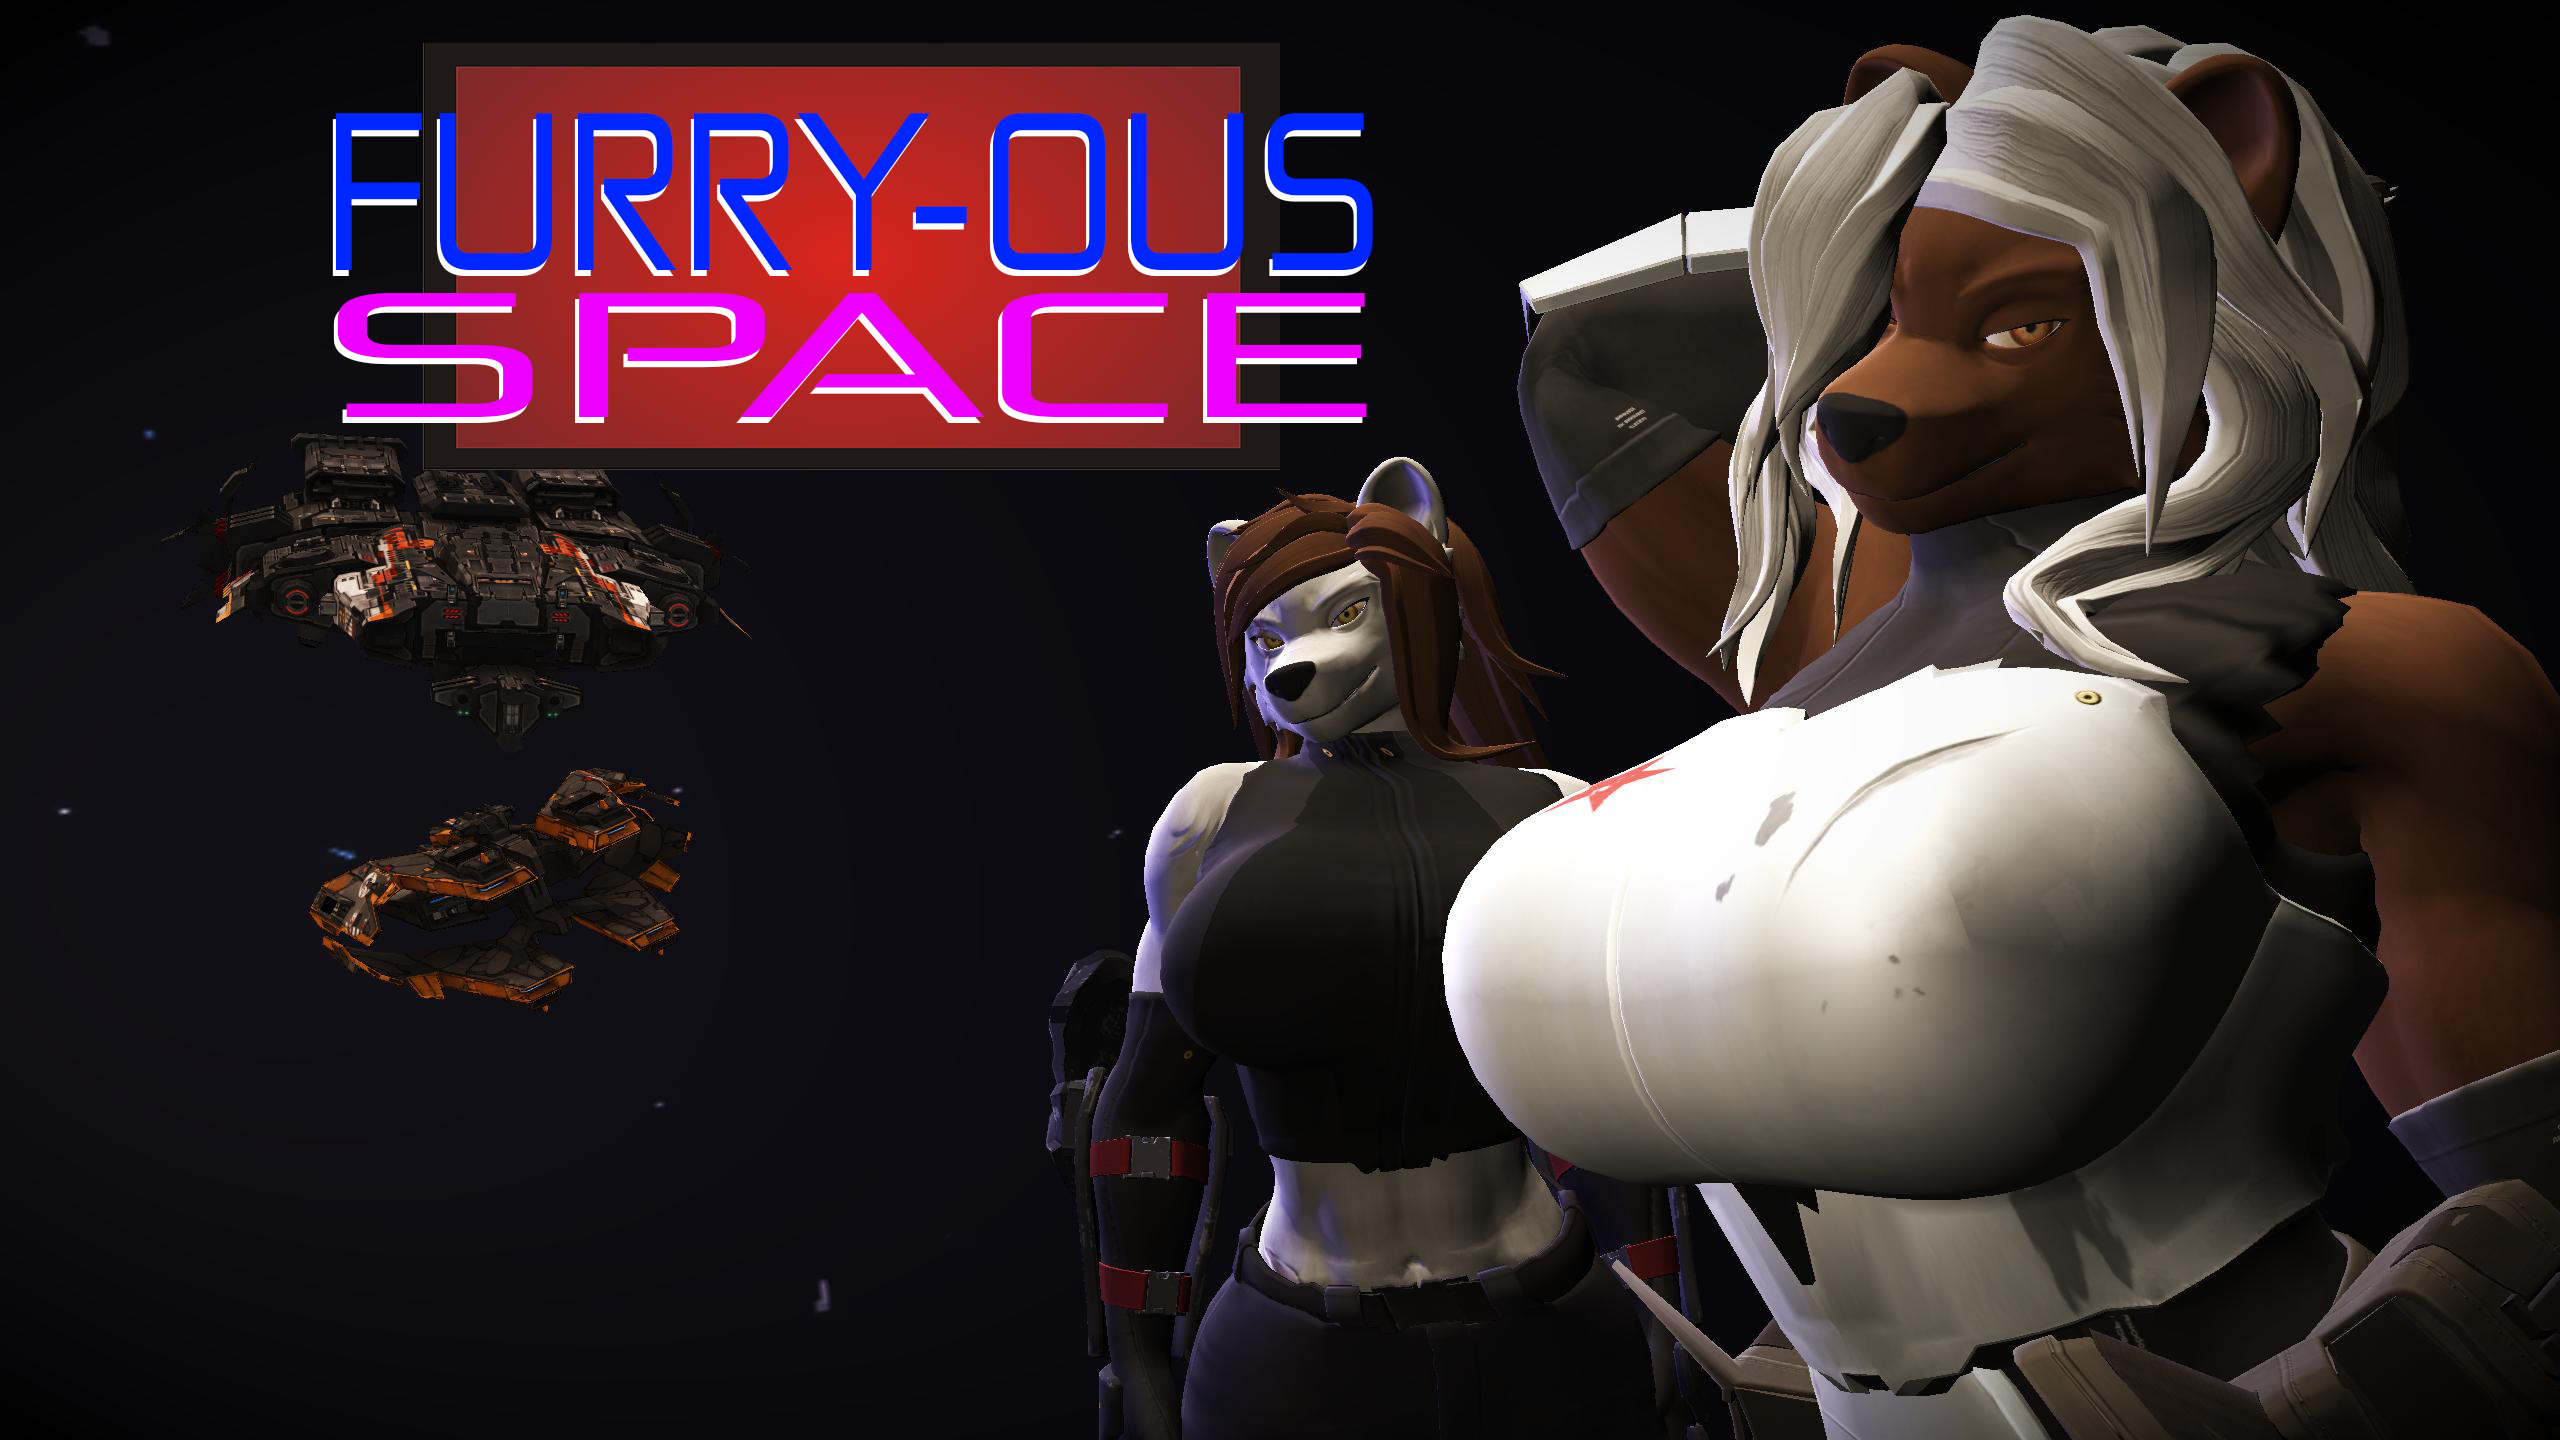 Furry Porn Black Box - Furry-ous Space Demo for Oculus/Meta Quest and Rift by Bald Hamster Games